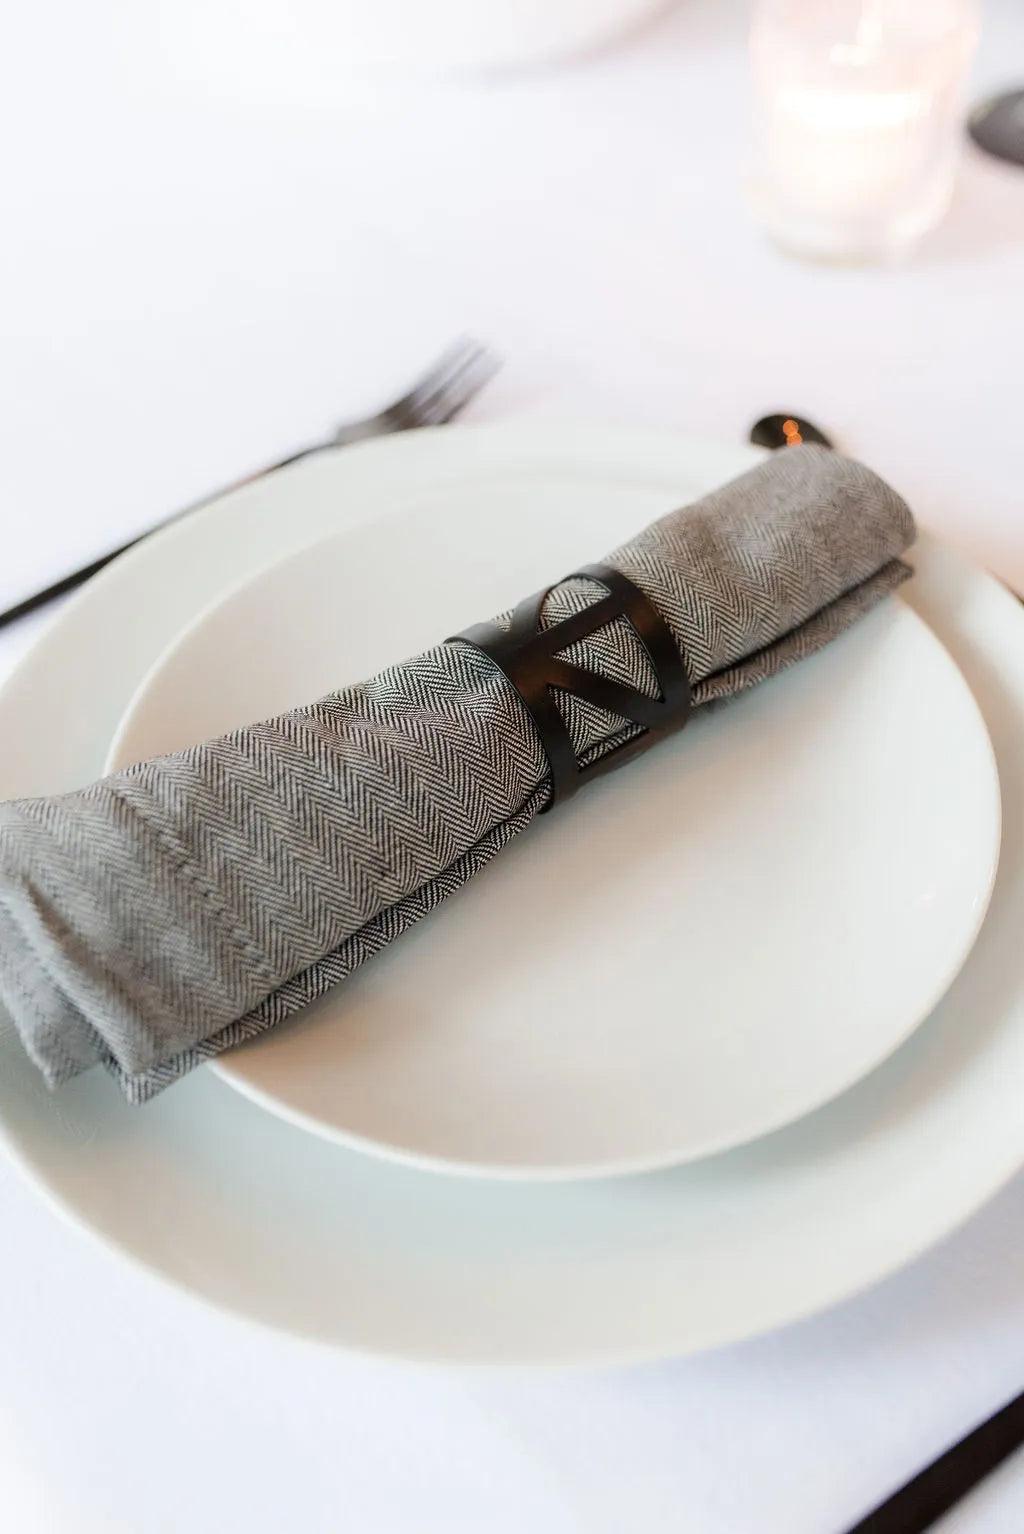 Black metal napkin ring holding a grey napkin sitting on two white plates with black cutlery on a white tablecloth